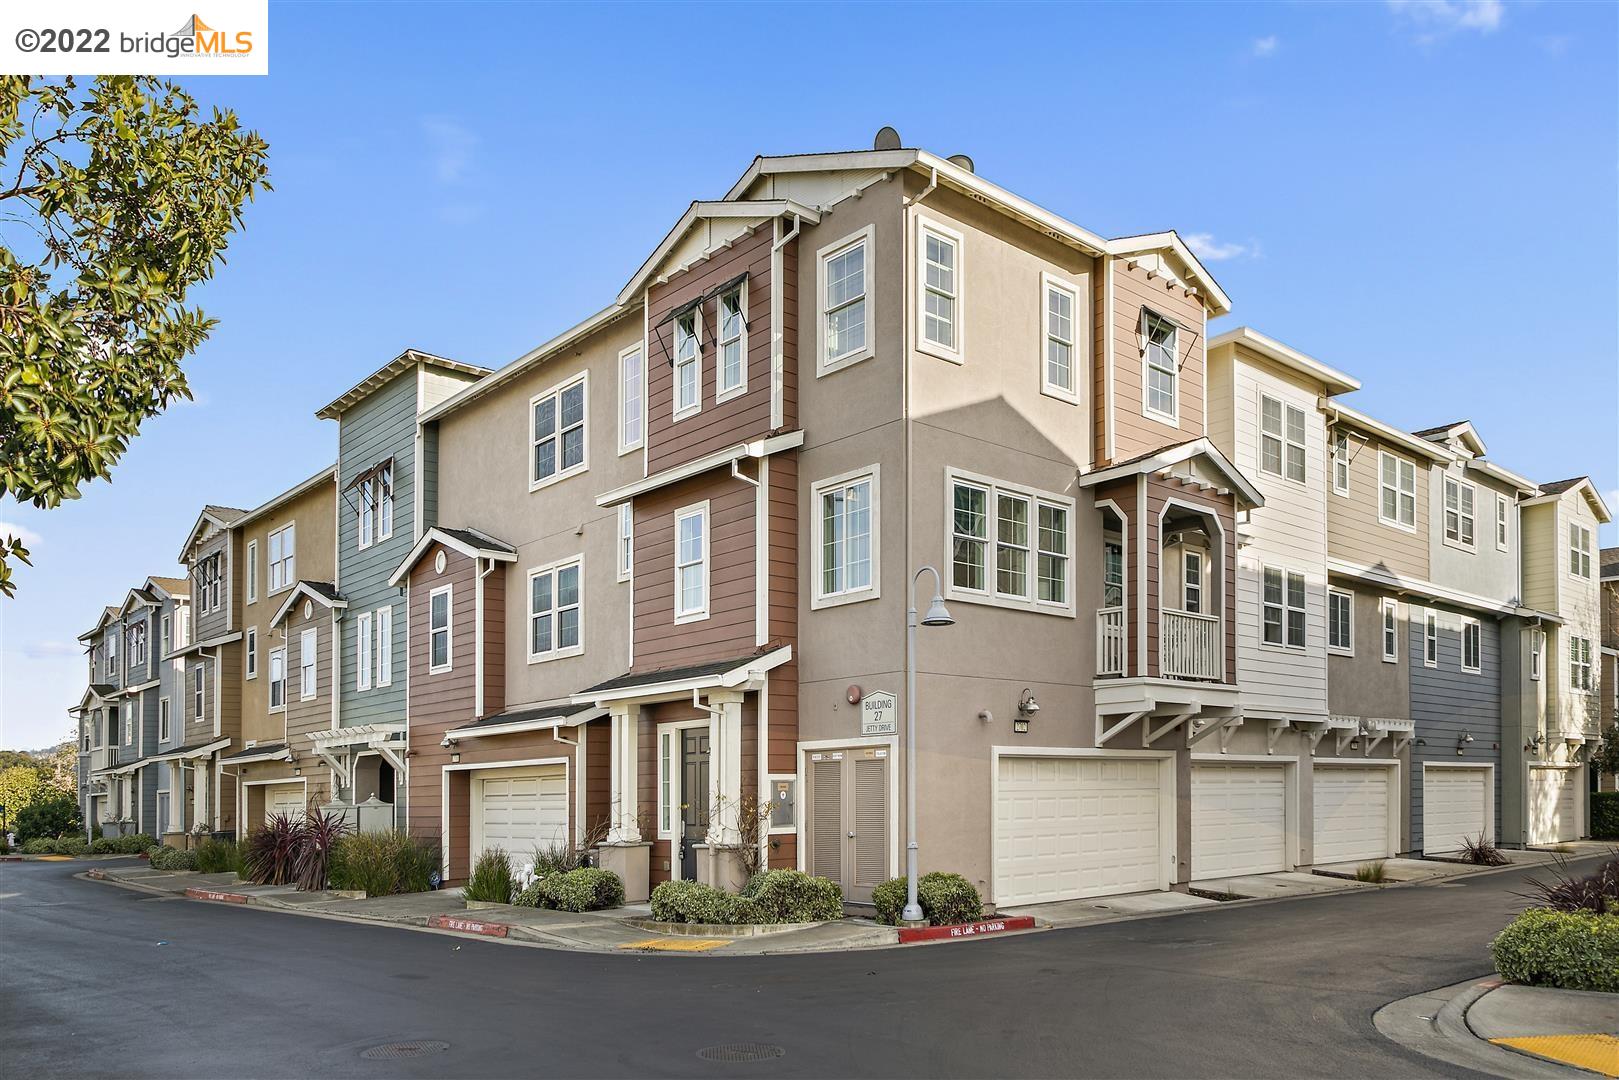 Photo of 2702 Jetty Dr in Richmond, CA